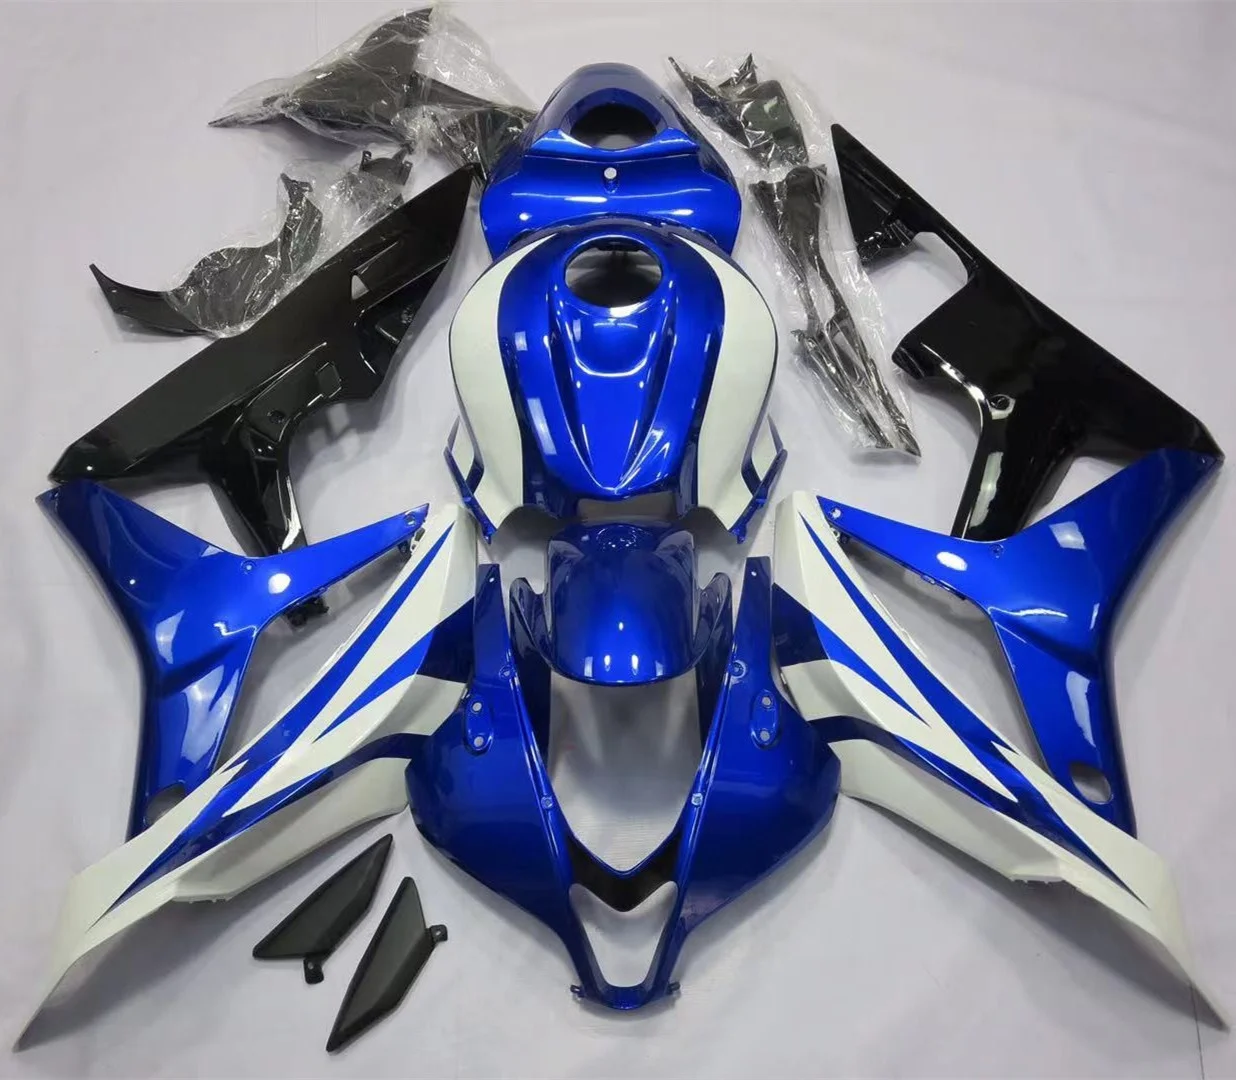 

2022 WHSC Blue And Black White Motorcycle Accessories For HONDA CBR600 2007-2008, Pictures shown